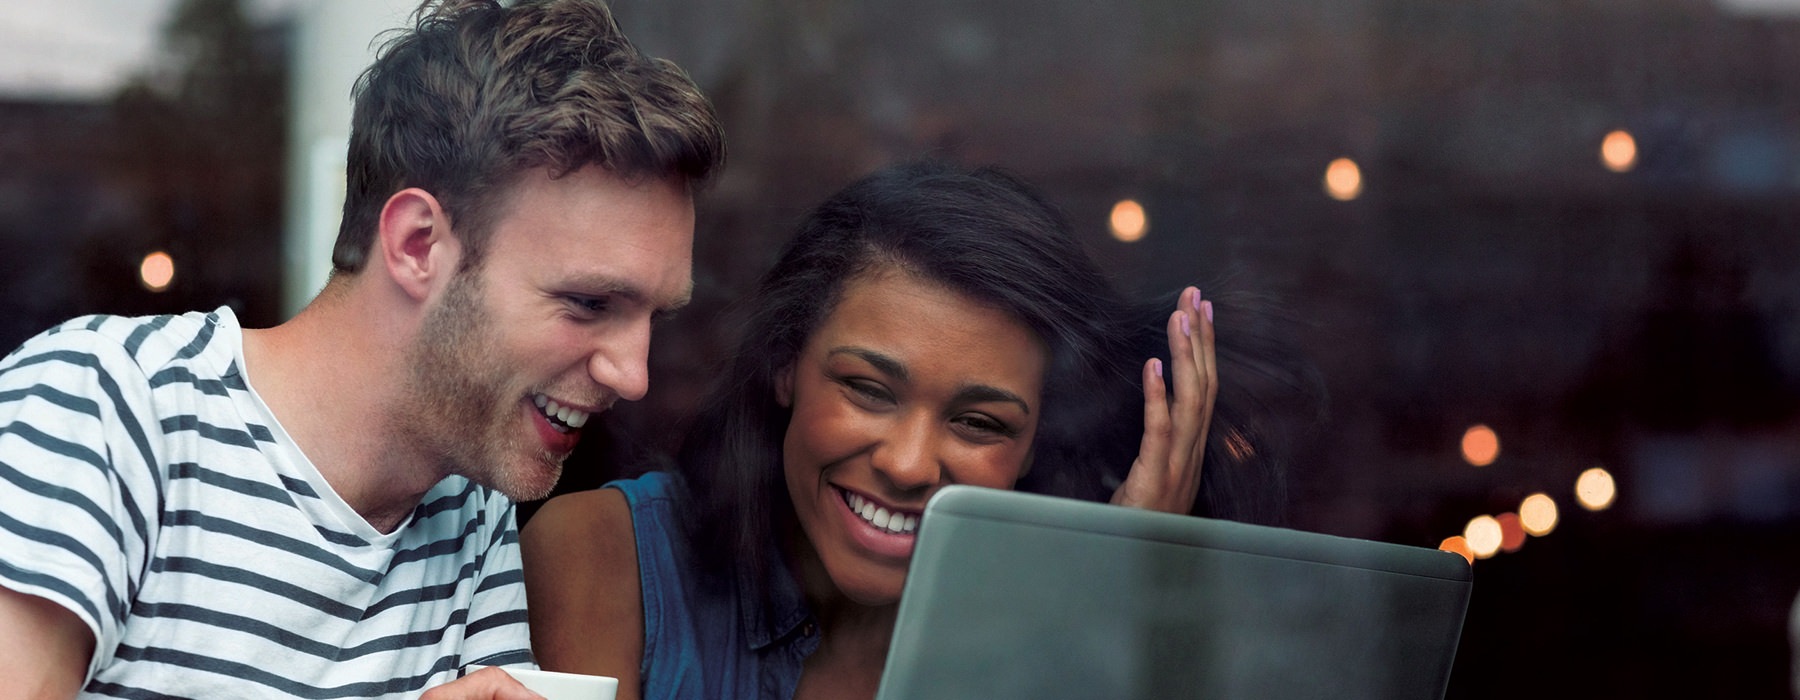 young man and woman in coffee shop window smile as they look at laptop screen